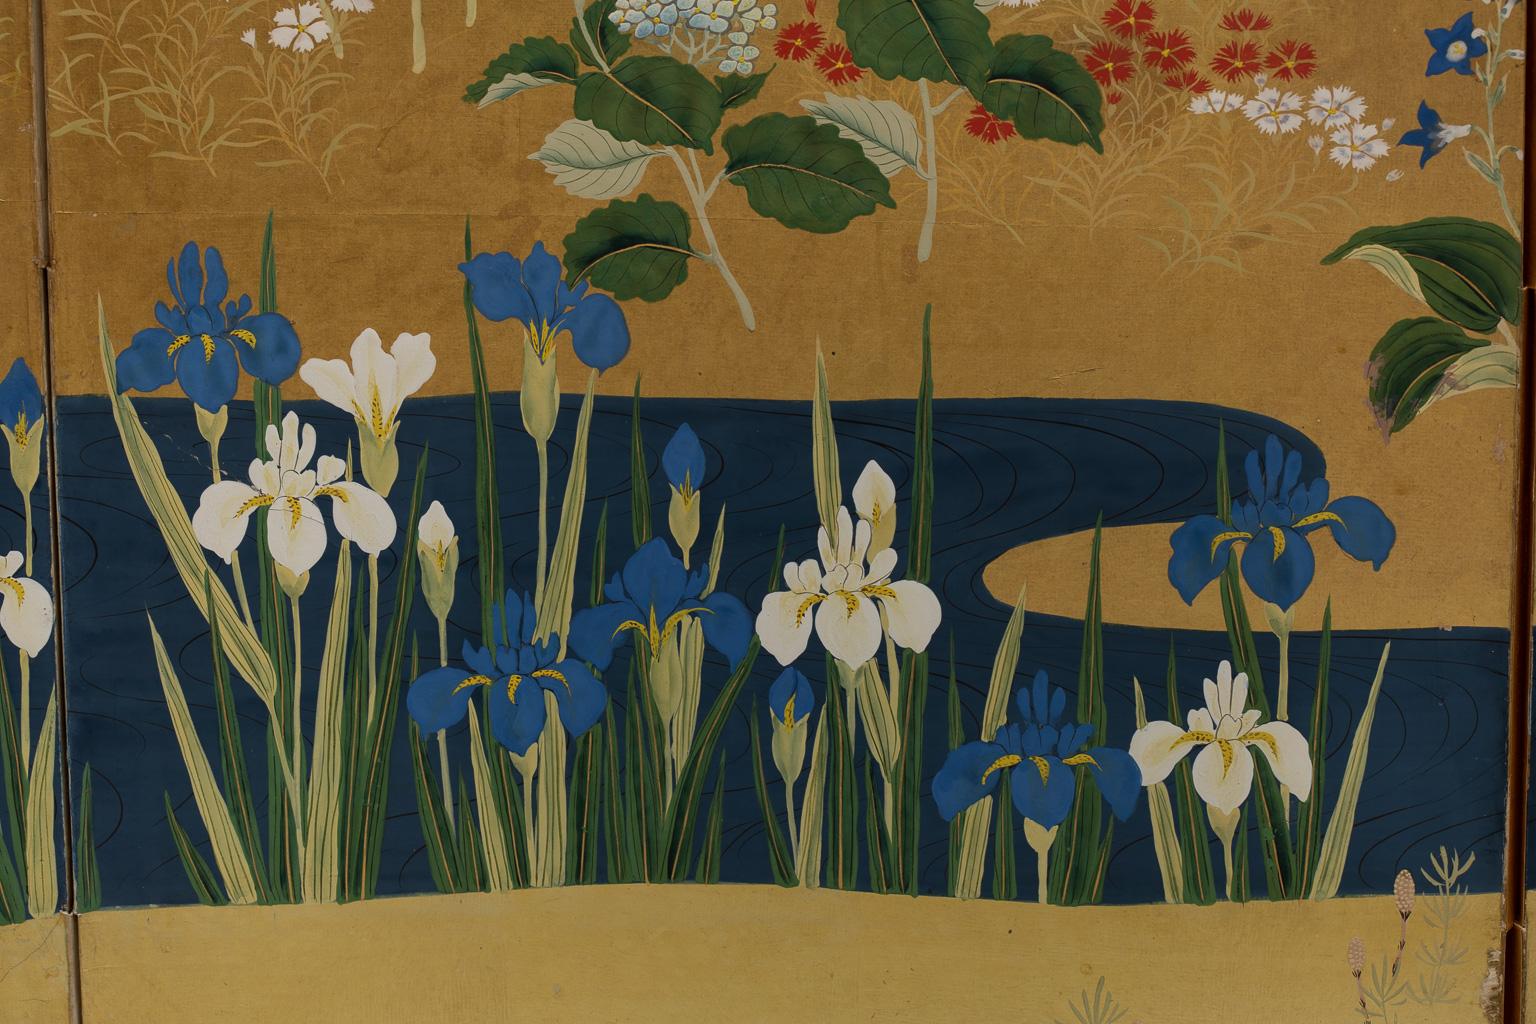 Kano School, Edo period, 19th century

Six-panel folding screens, ink, color, gofun and gold leaf on paper

Measures: 107 by 268 cm

 
The landscape shows a cherry tree in full blossom on the right side and a blue stream on the left. A